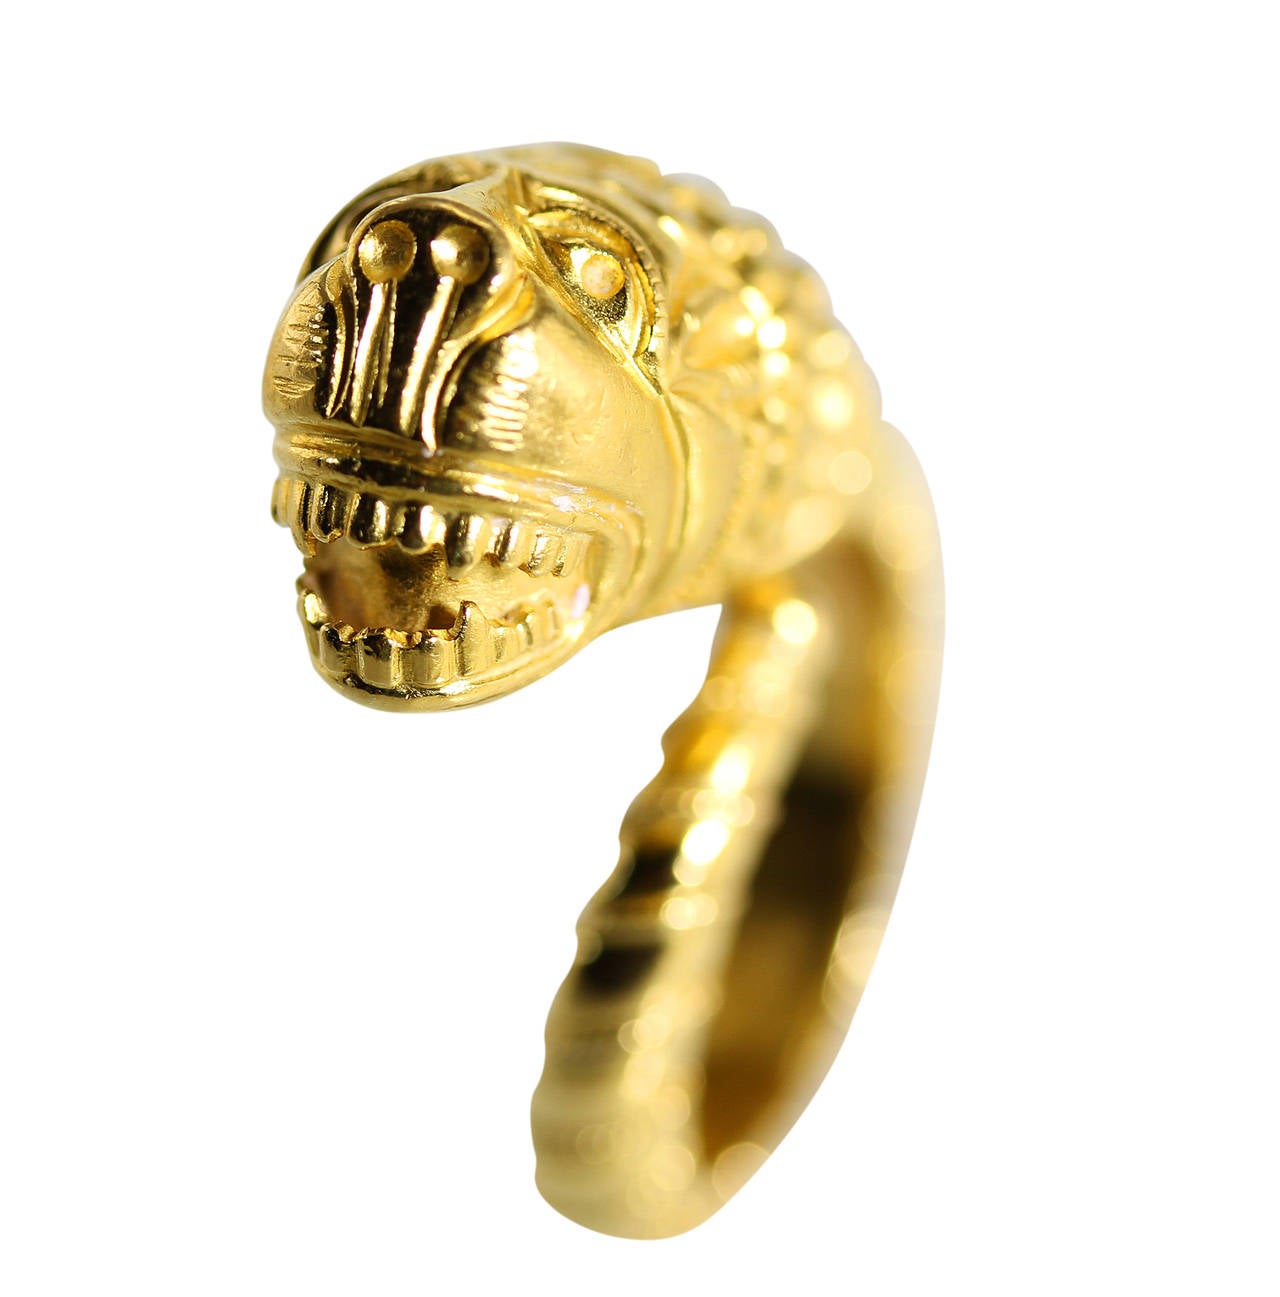 An 18 karat gold lion's head ring by Lalaounis, Greece, designed as a lion's head with body wrapping around, all of textured gold, gross weight 9.6 grams, size 5 3/4, measuring 1 1/2 by 1 by 1/2 inches, with maker's mark for Lalaounis, numbered A.8,